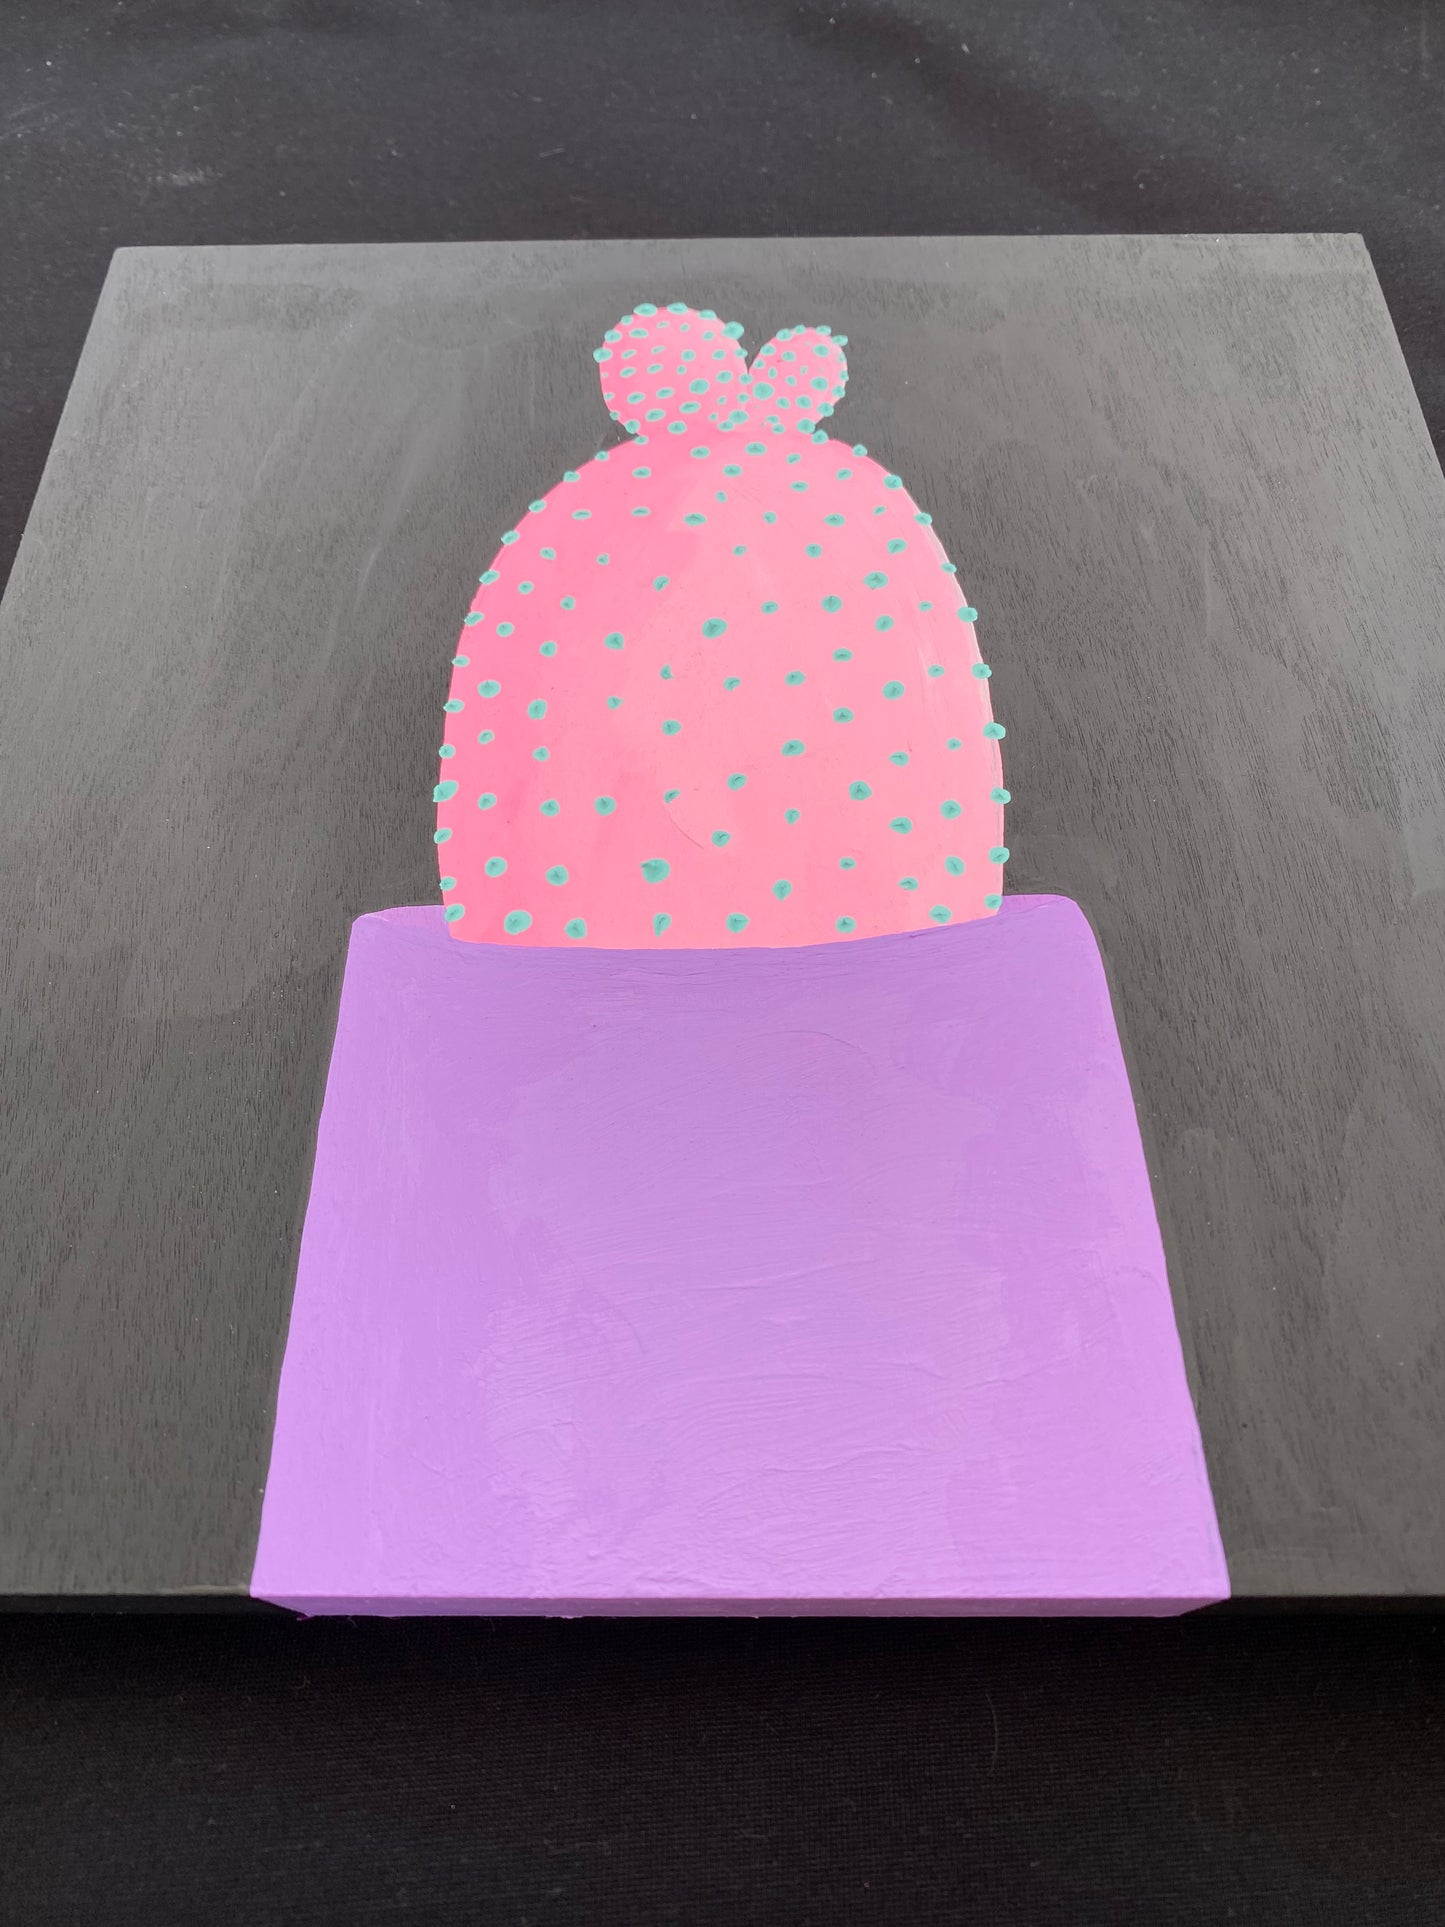 Painting Pink Prickly Pear Cactus